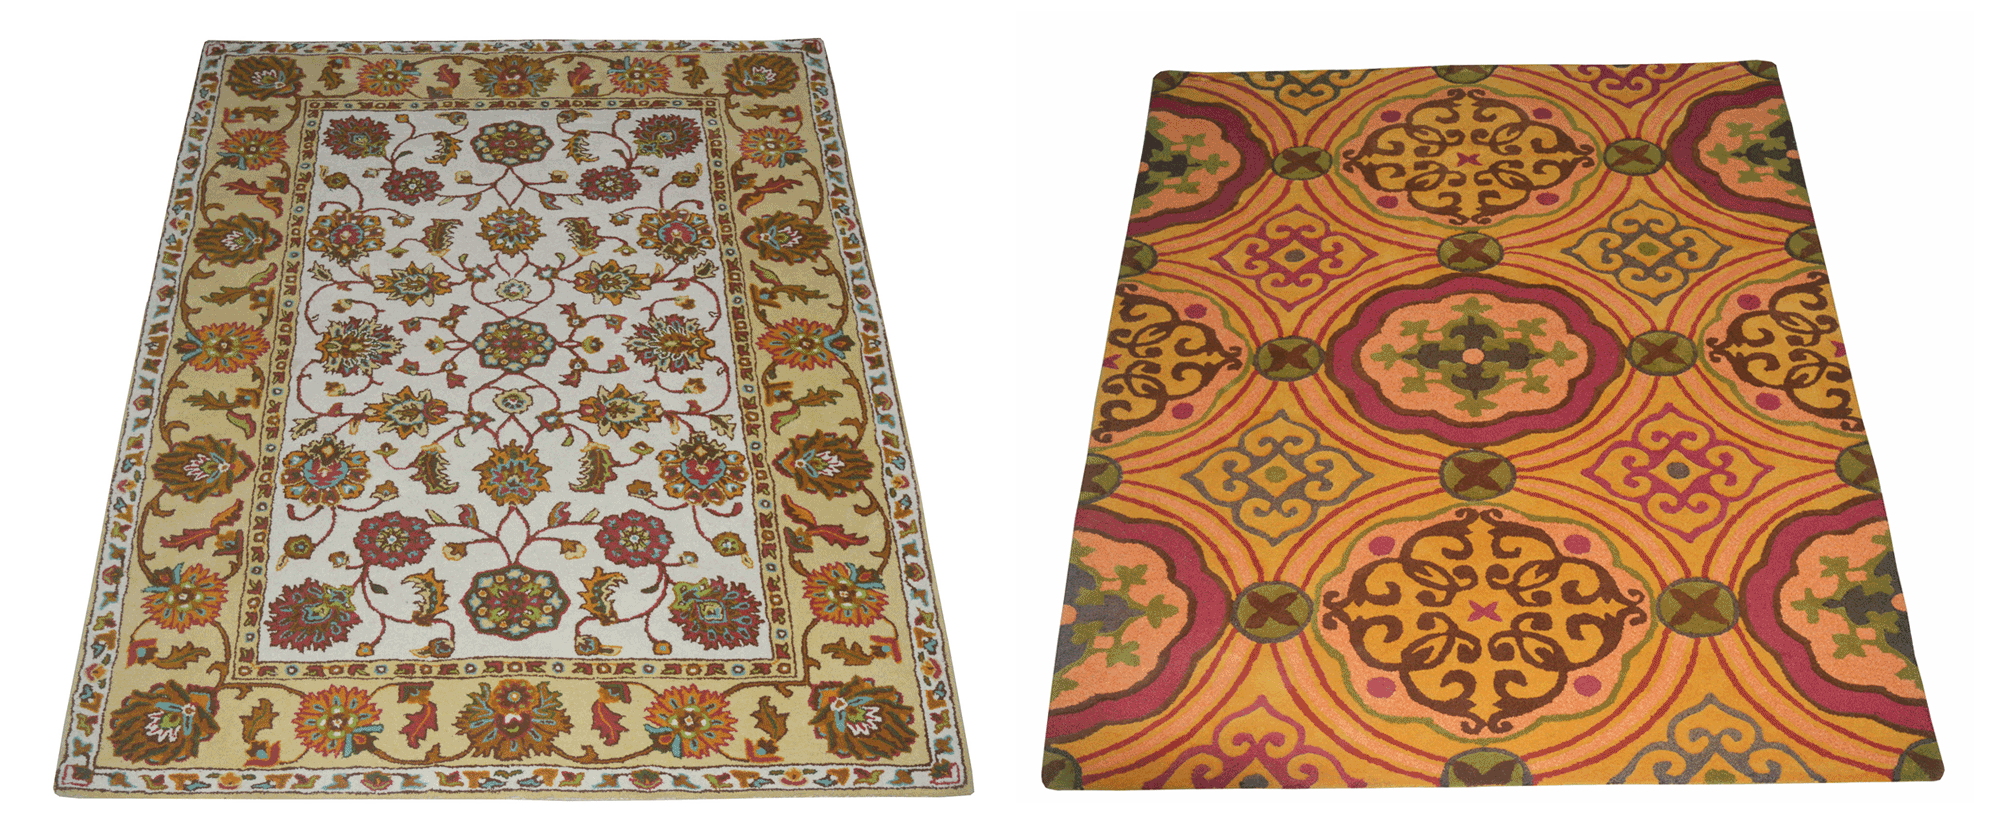 Welcome – CARPETS